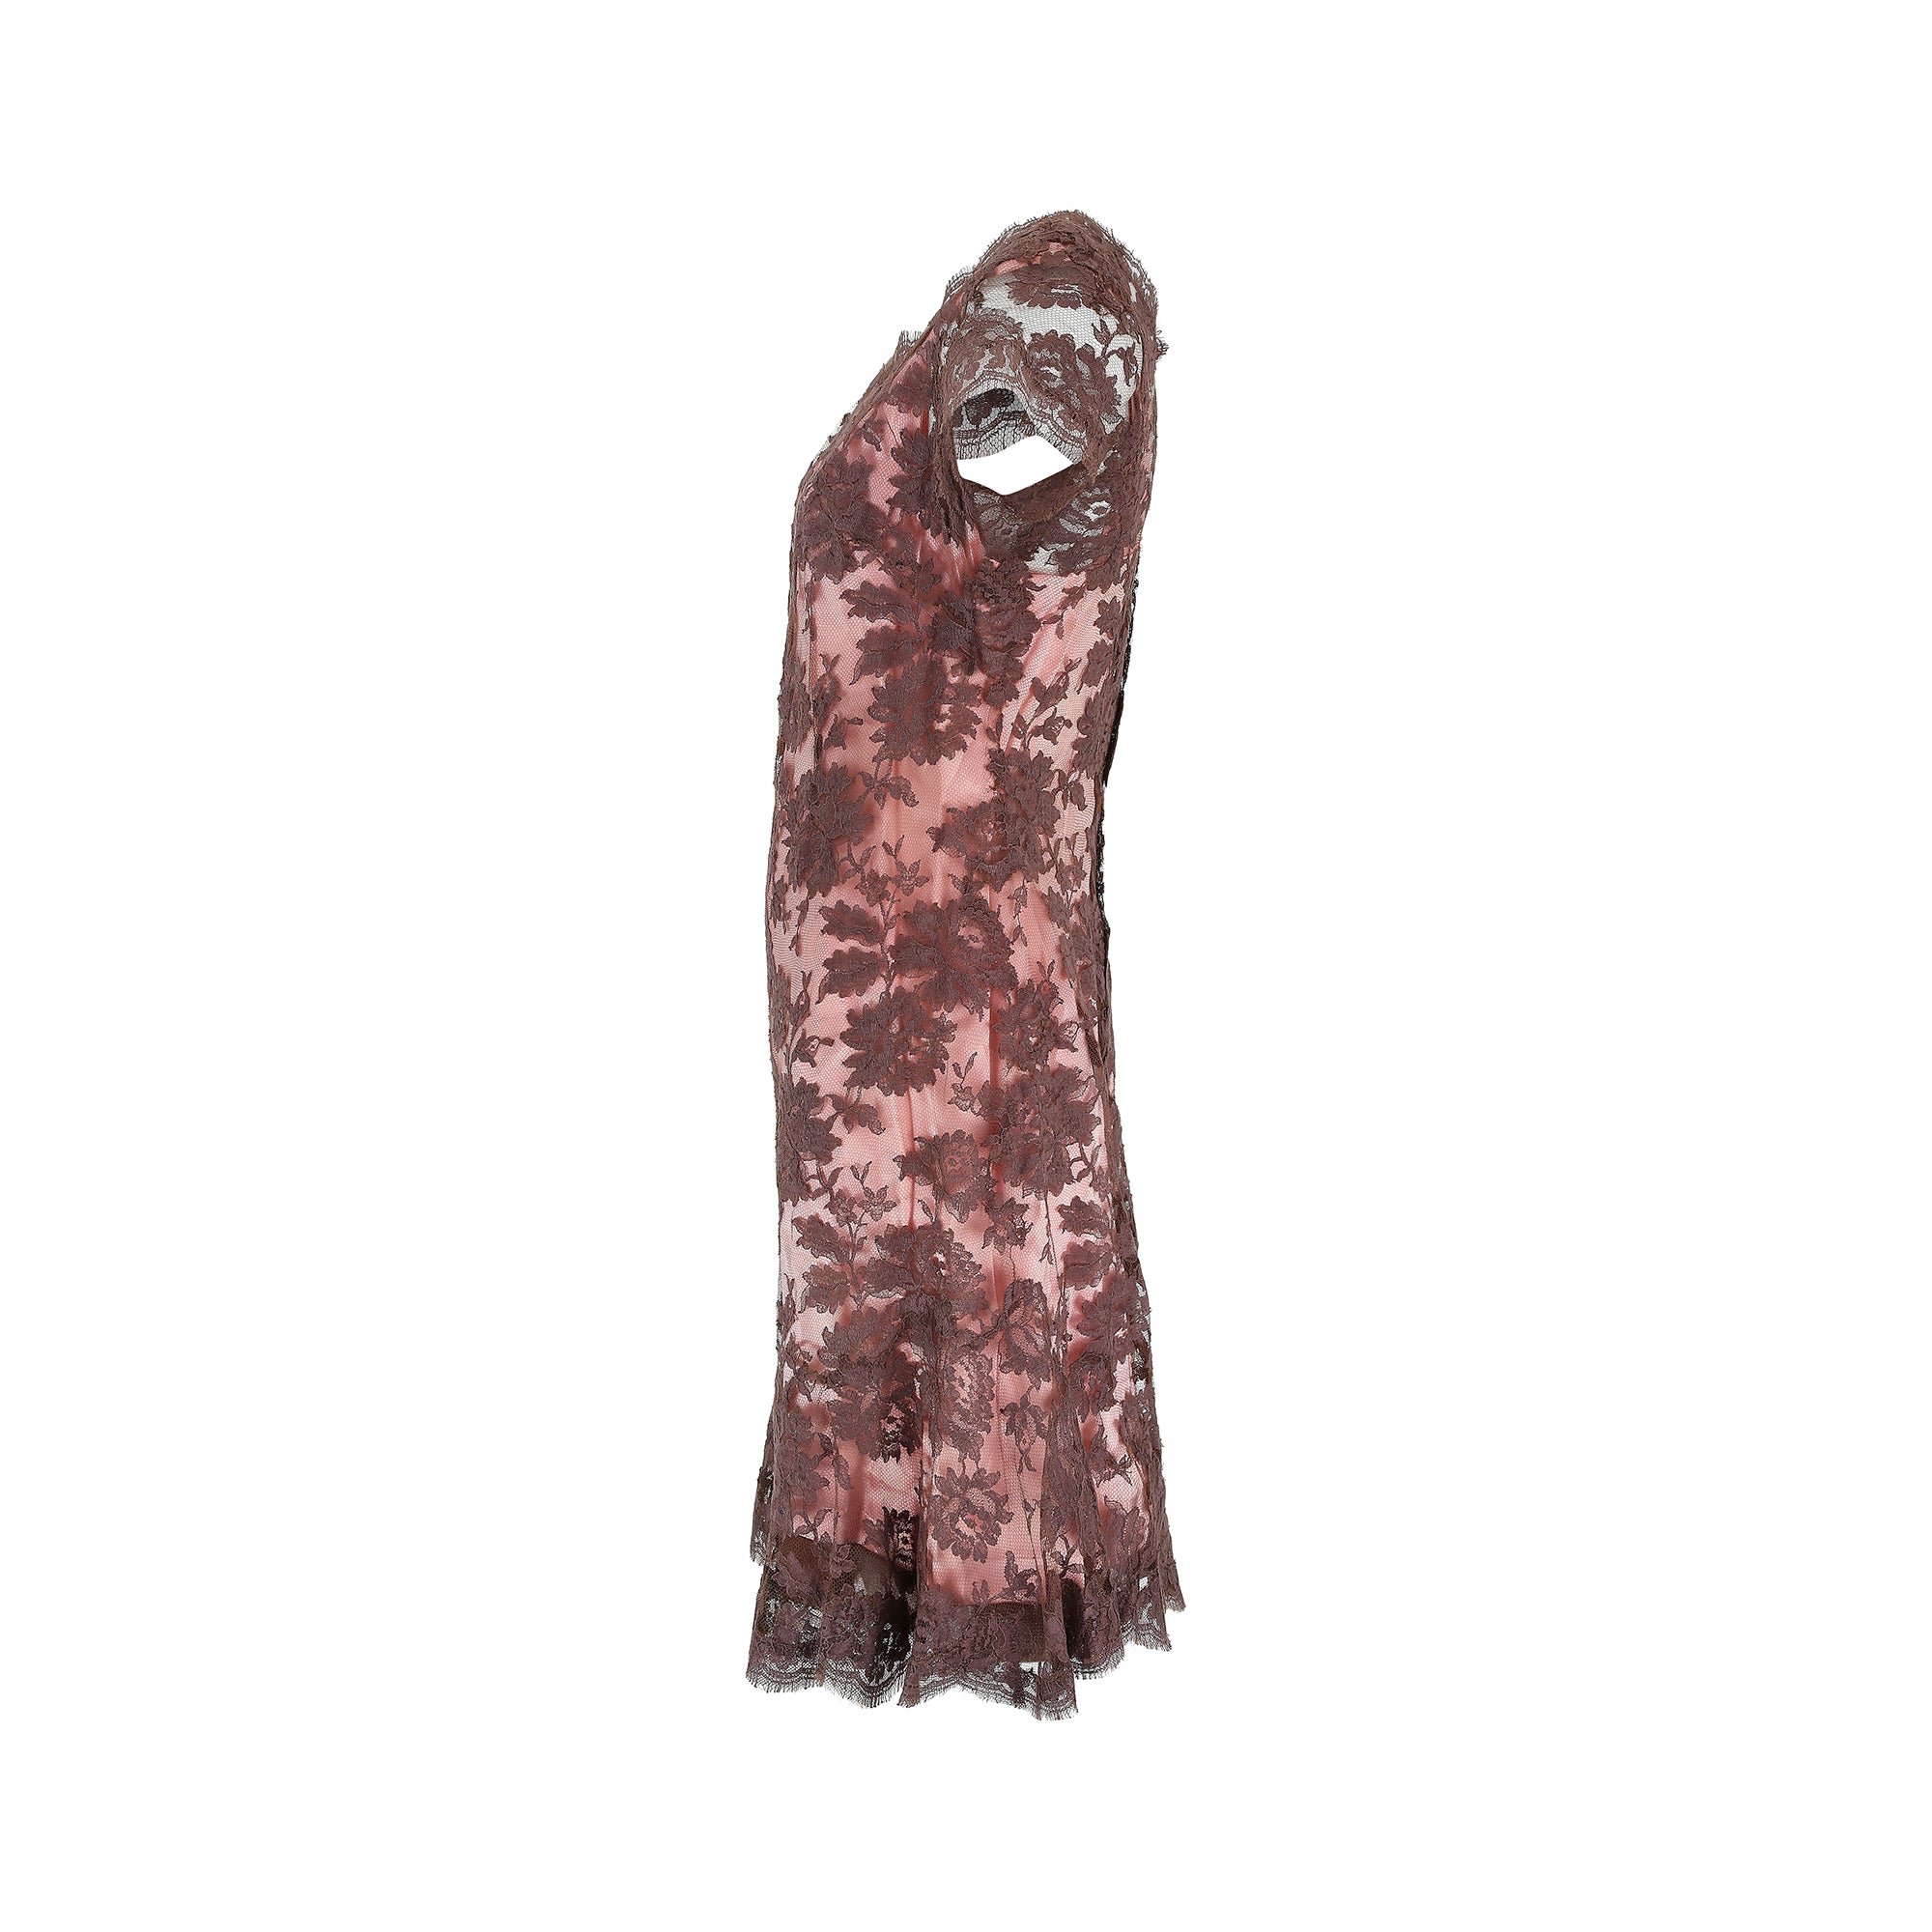 ARCHIVE - 1950s Worth London Couture Brown Lace and Pink Sheath Dress